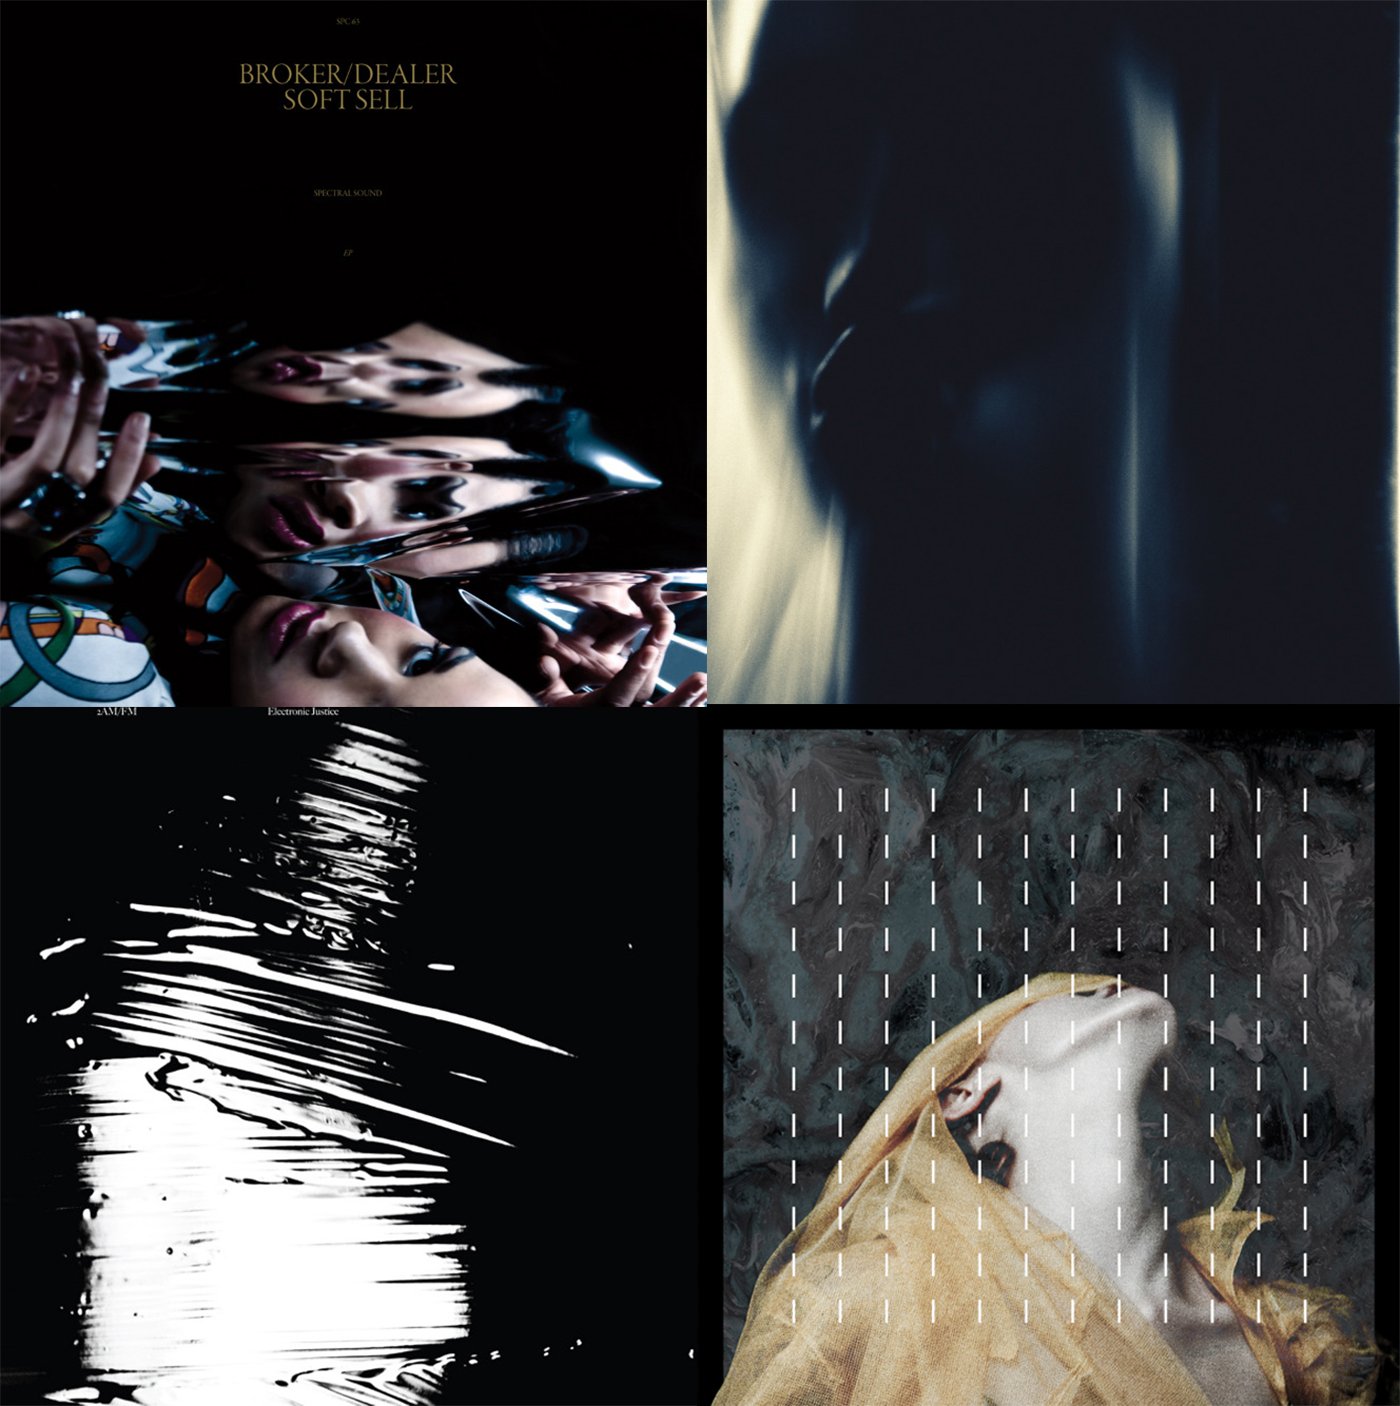 ghostly international releases